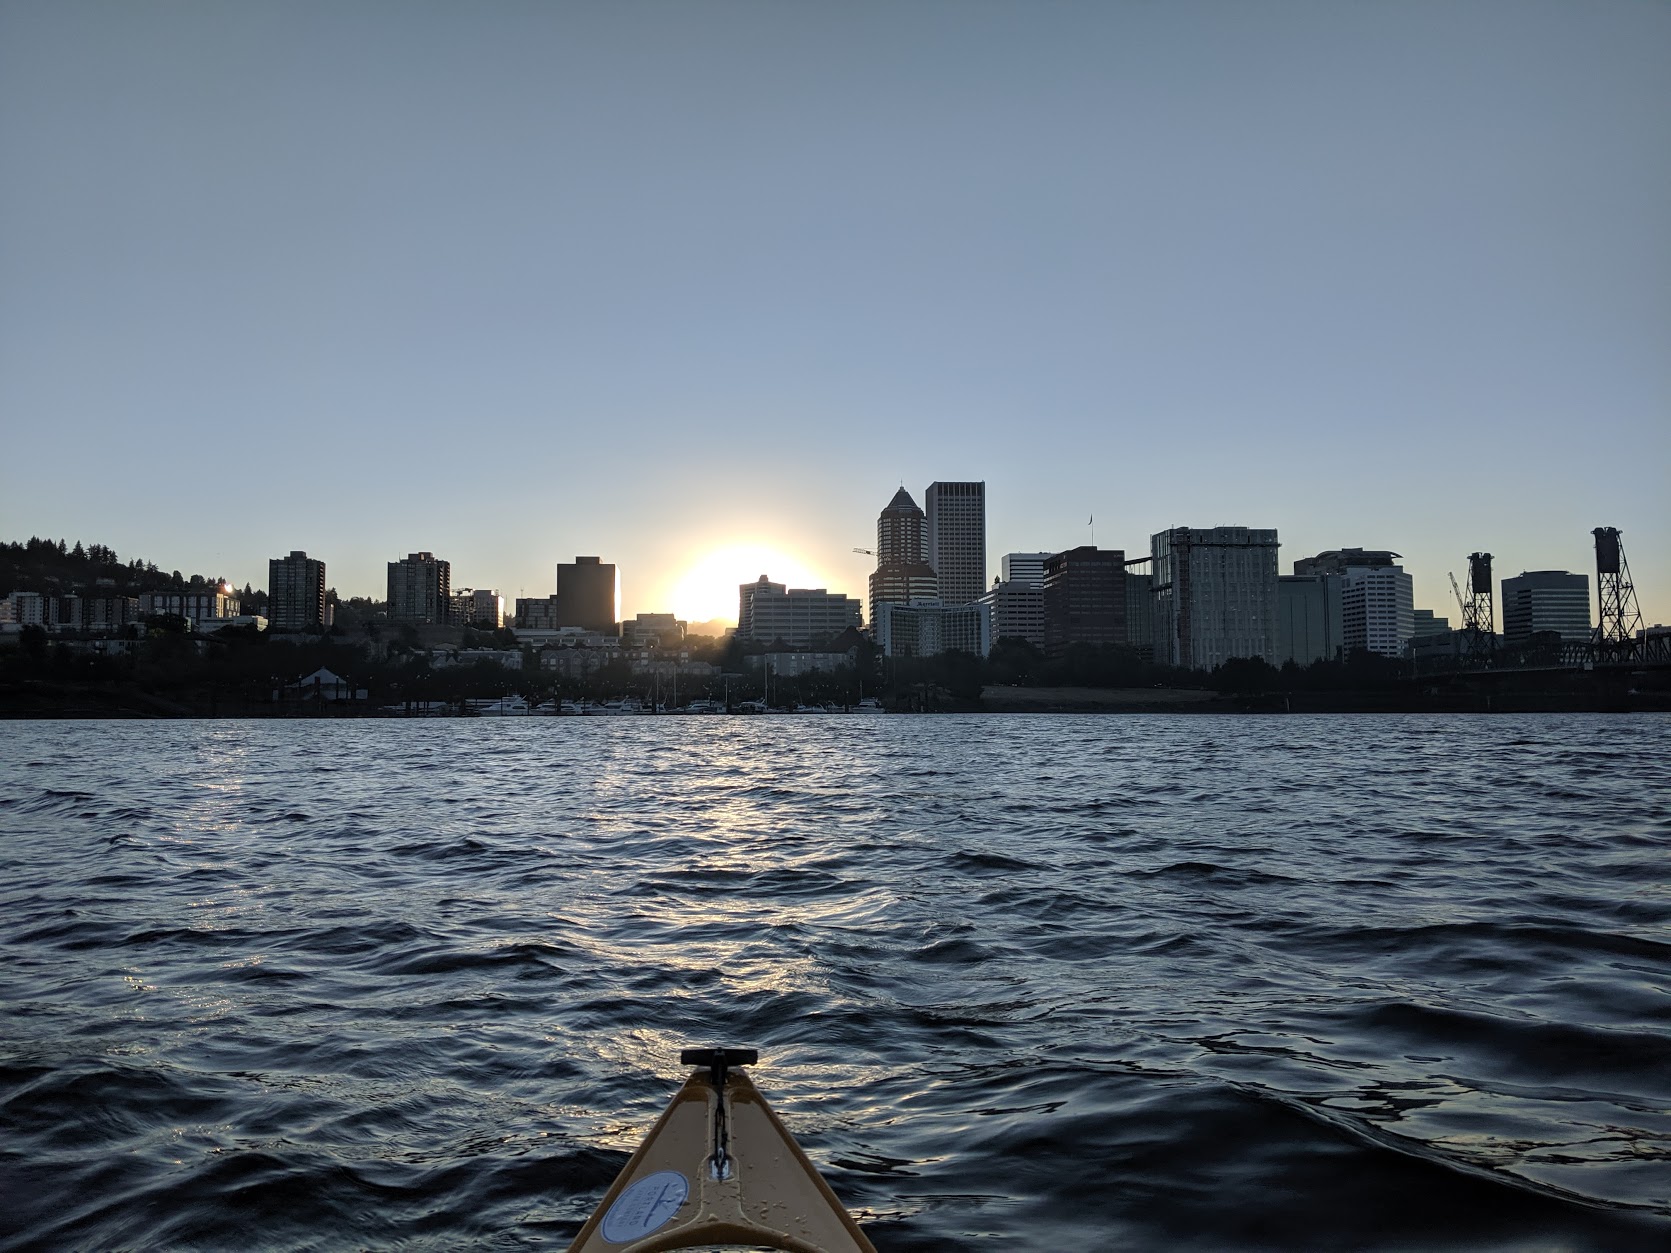 Sunset over the Portland skyline from the water